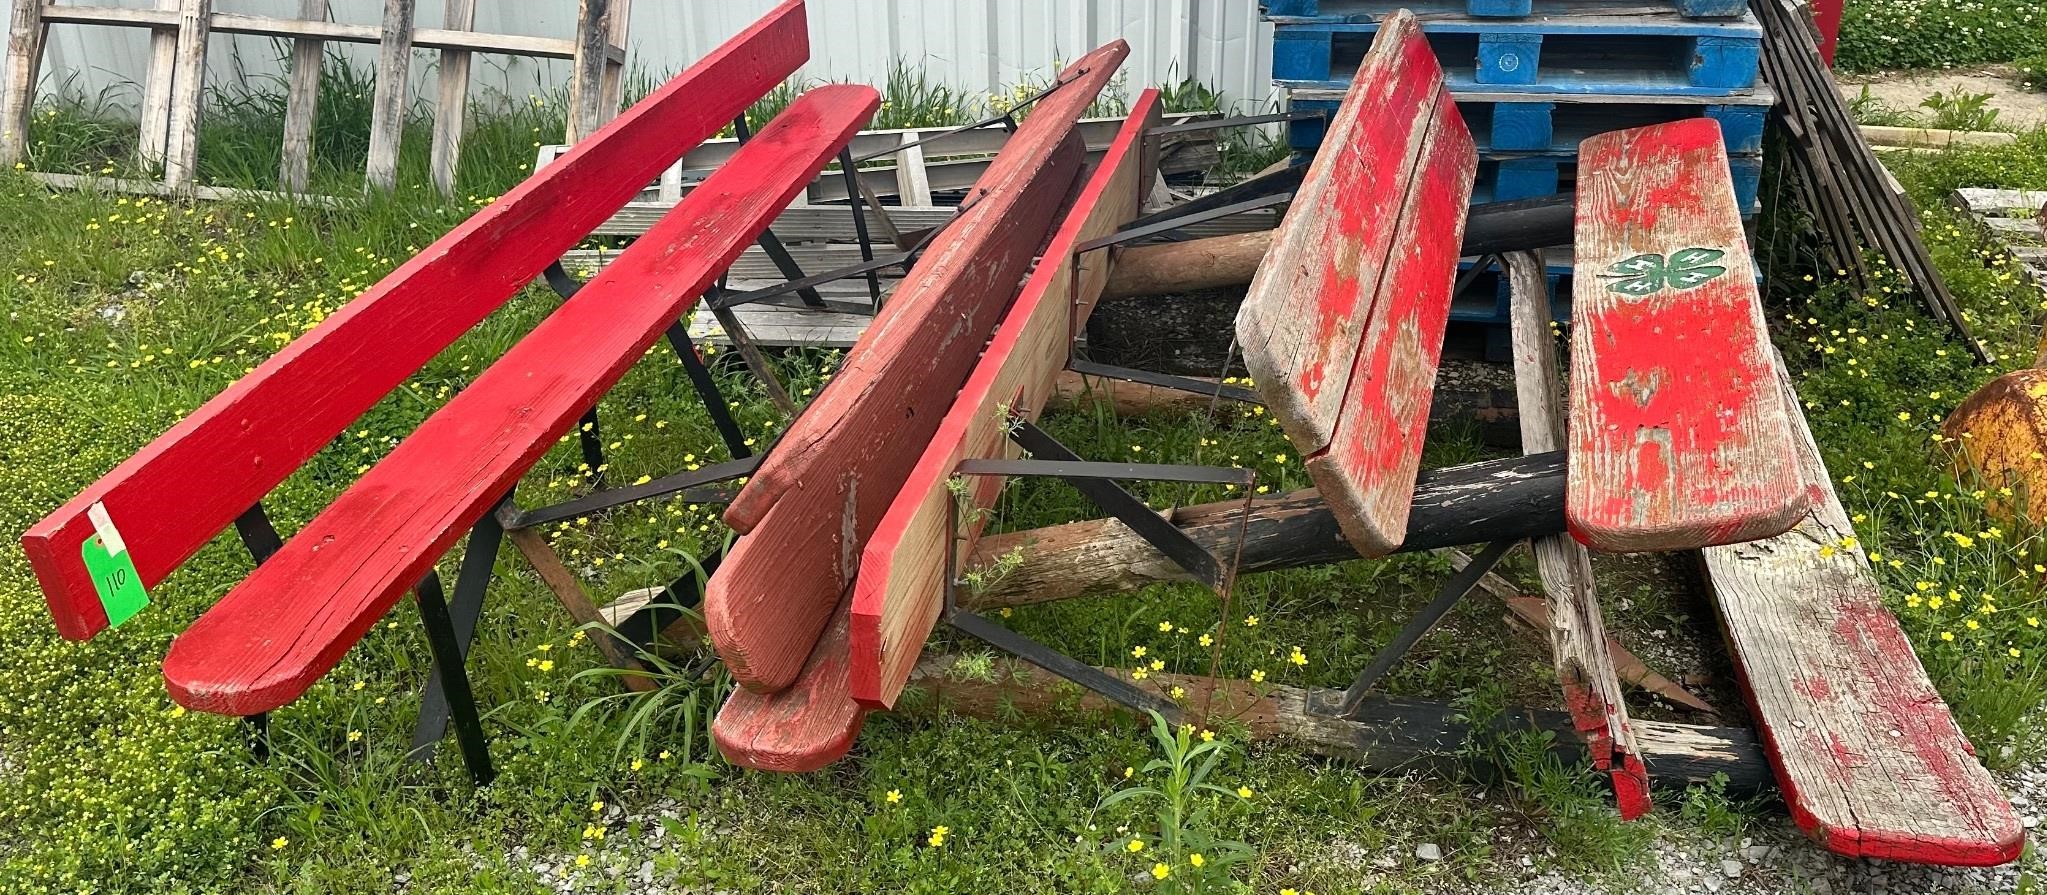 Assorted Red Benches